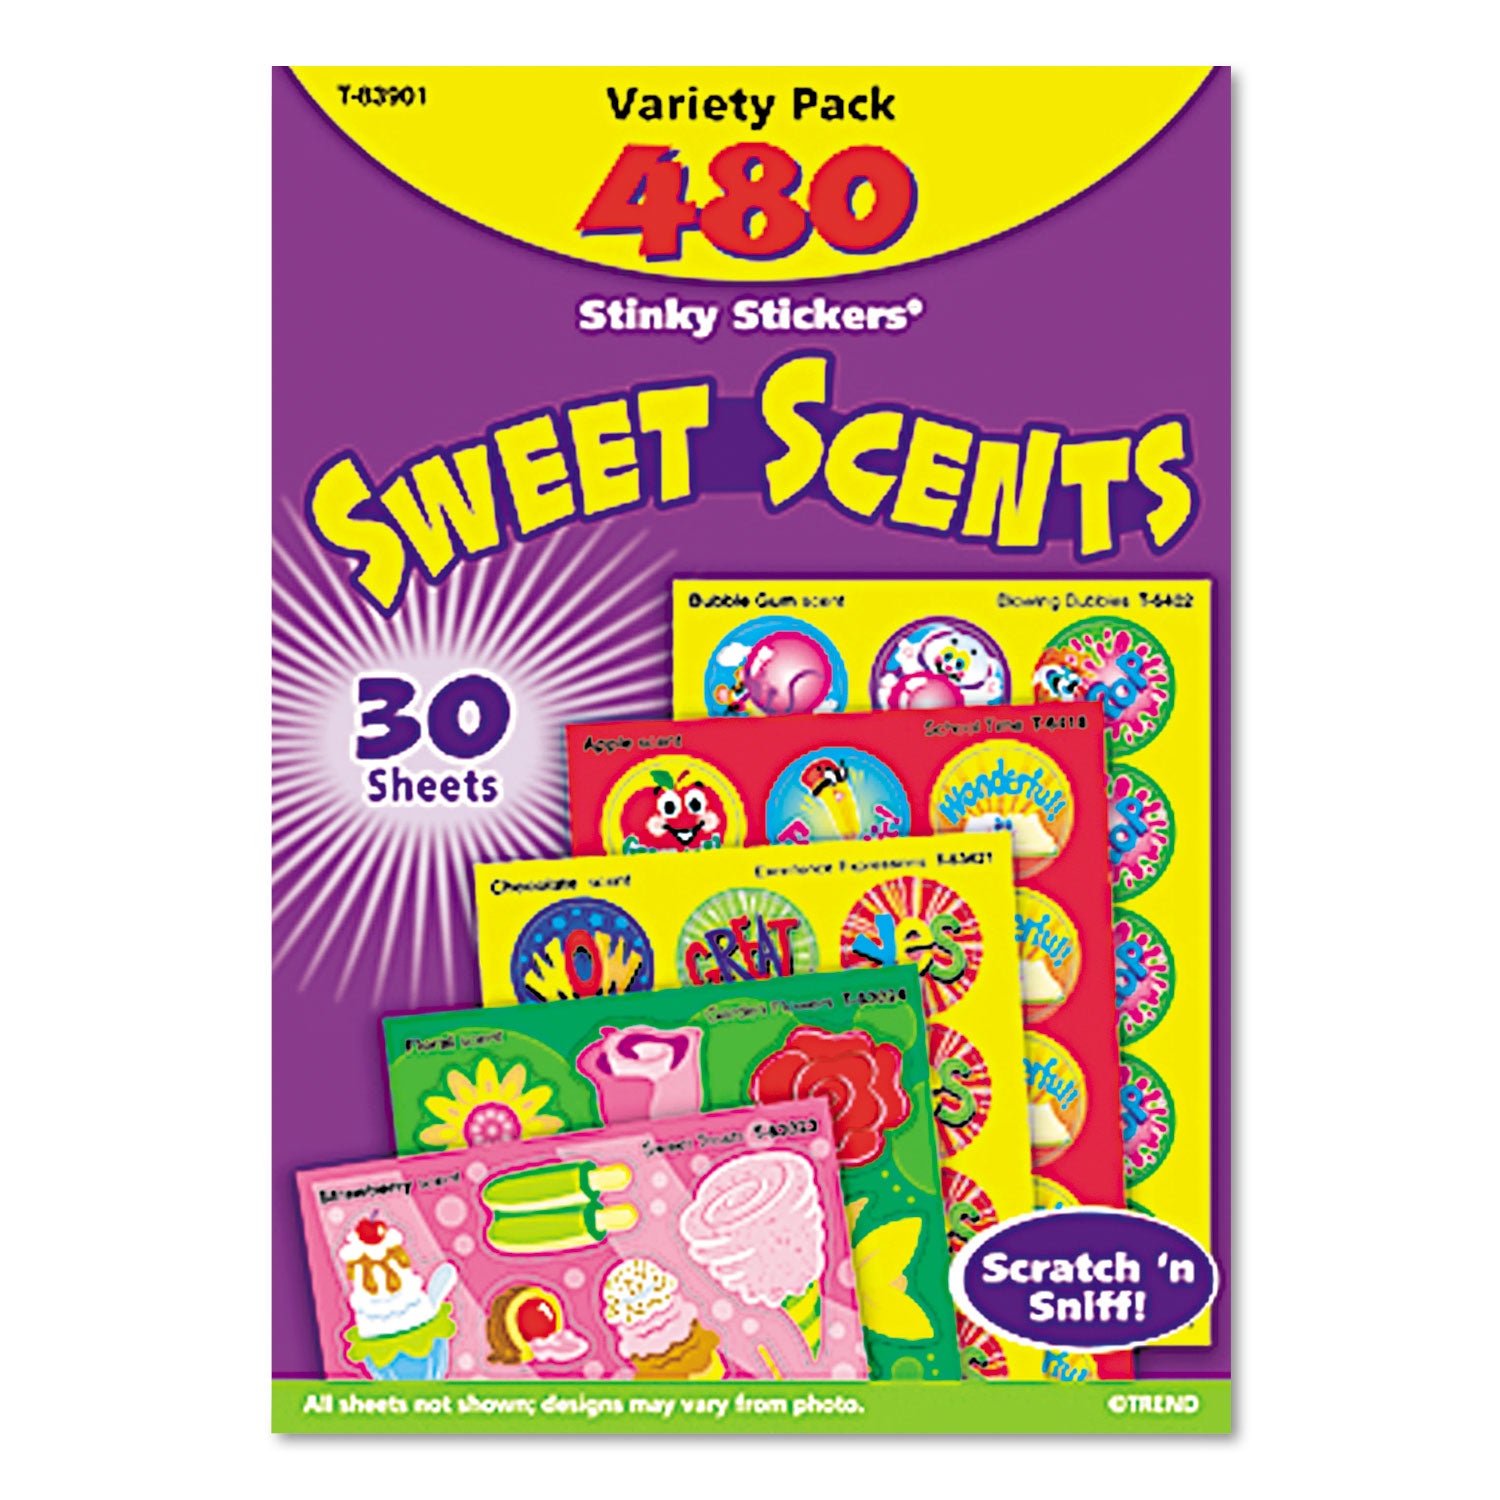 Stinky Stickers Variety Pack, Sweet Scents, Assorted Colors, 483/Pack - 